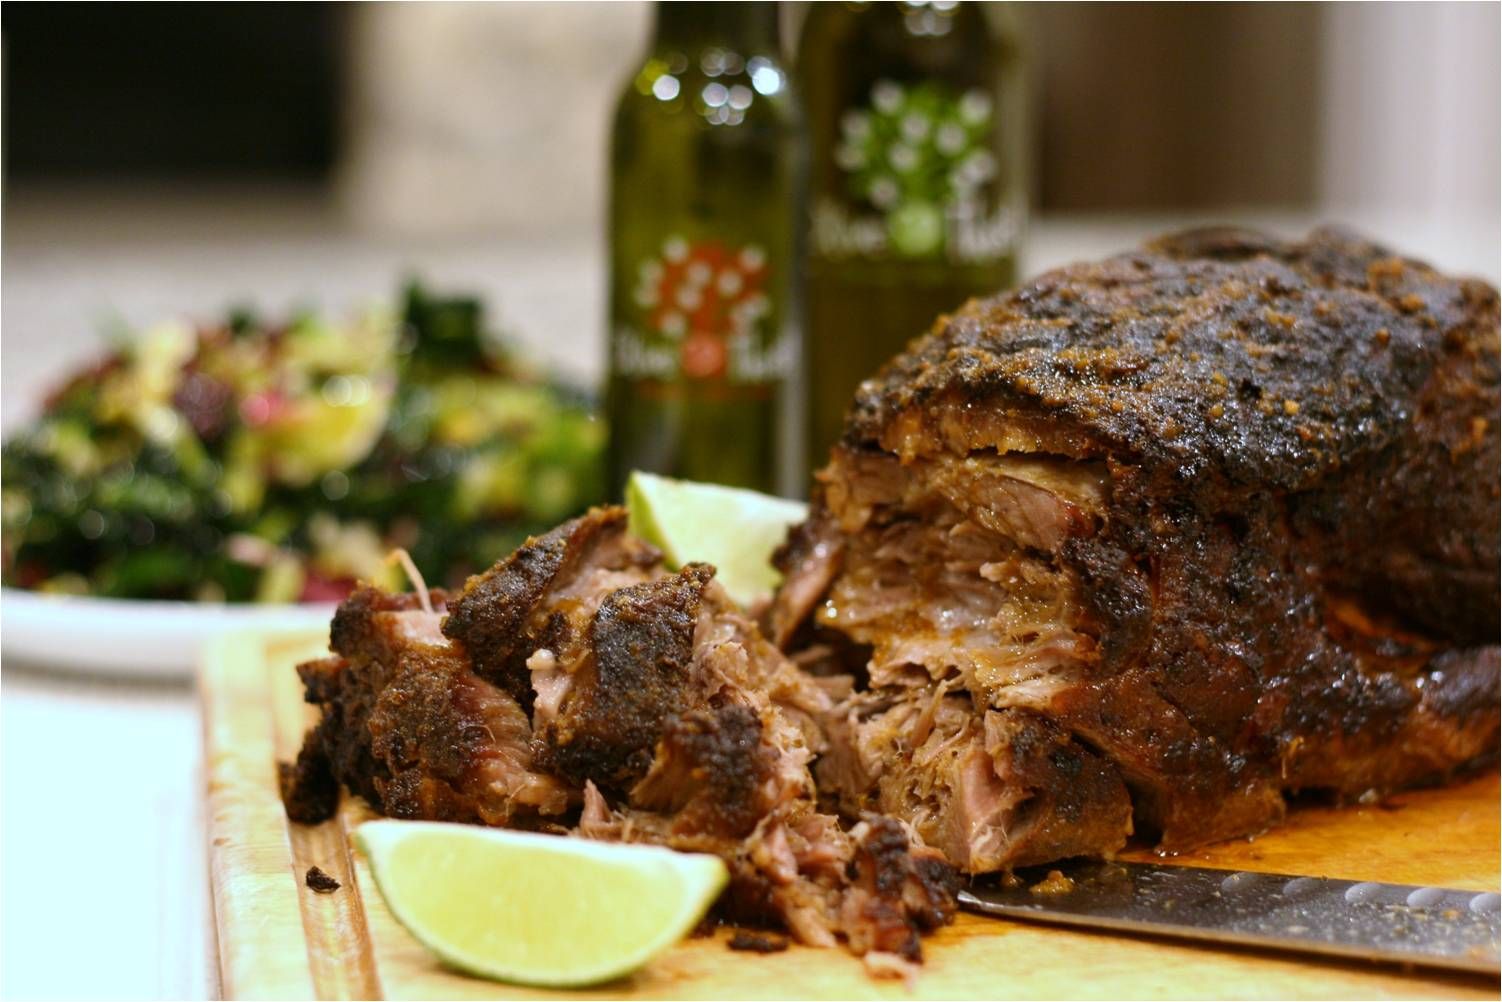 Rost Garten Best Of Recipe Slow Roasted Spiced Pork with Lime Olive Oil and